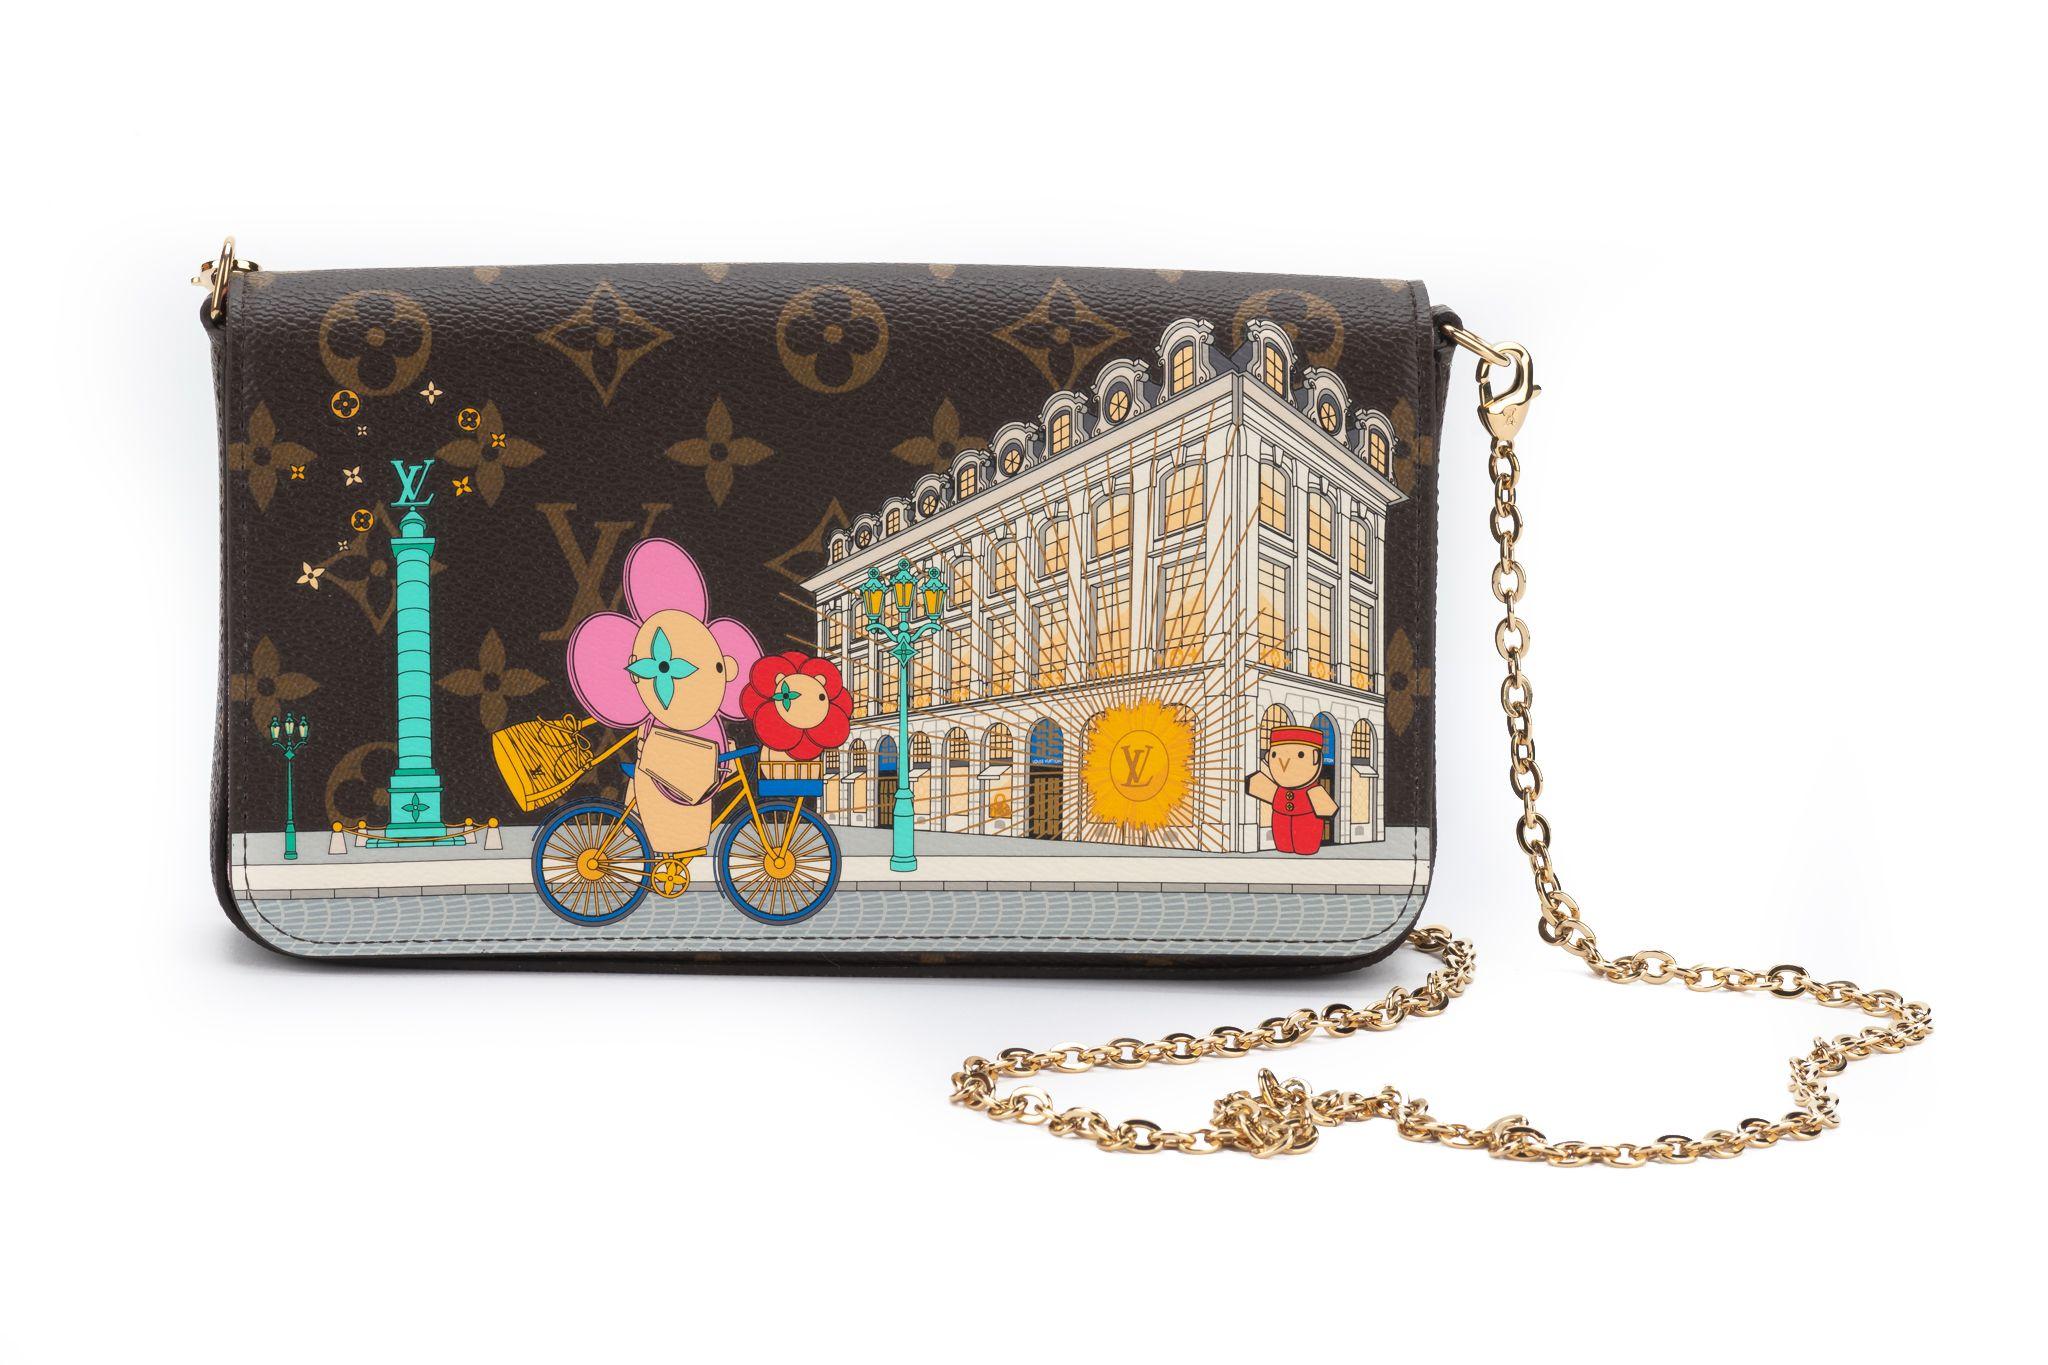 Louis Vuitton Felicie Pochette belongs to the Vivienne Holidays 2022 collection. It's brand new and comes with the original dustcover and box.